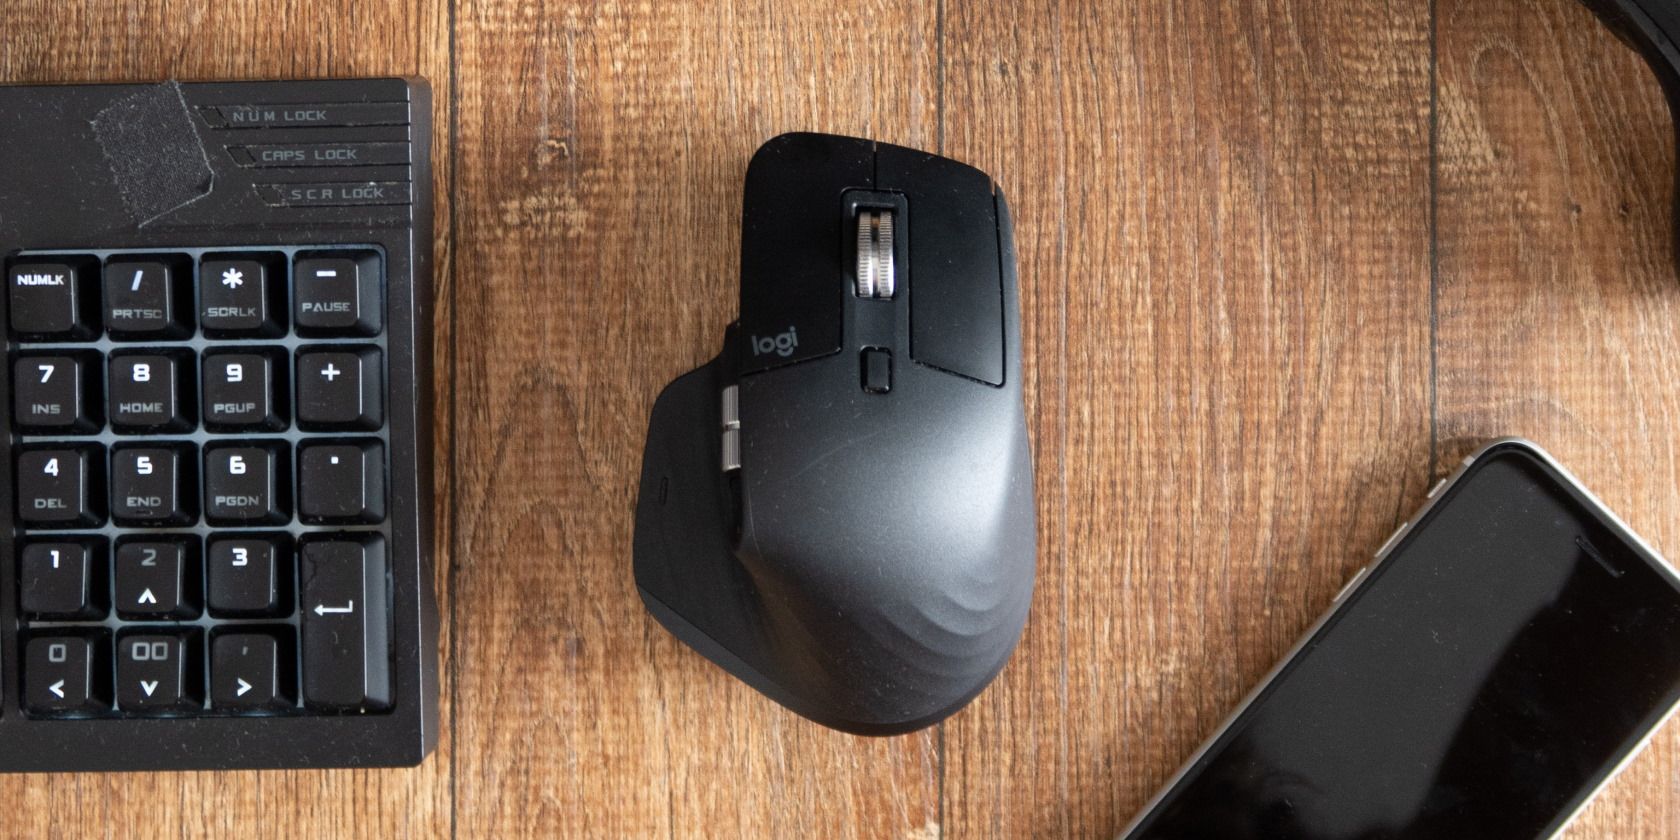 Connect a mouse and keyboard for Linux gaming